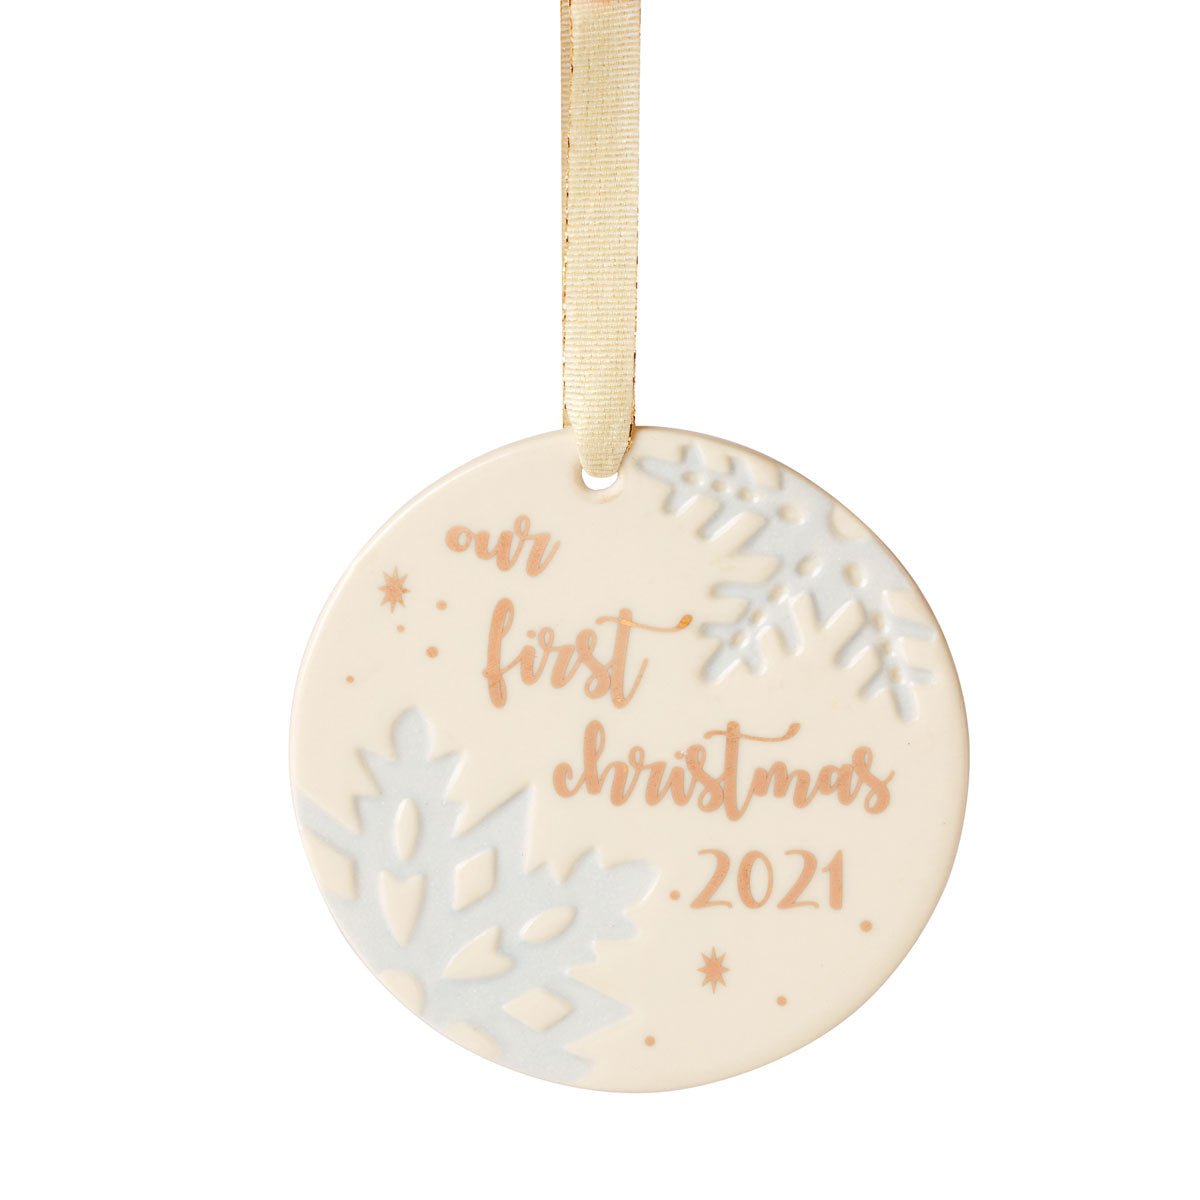 Lenox 2021 Our First Christmas Ornament